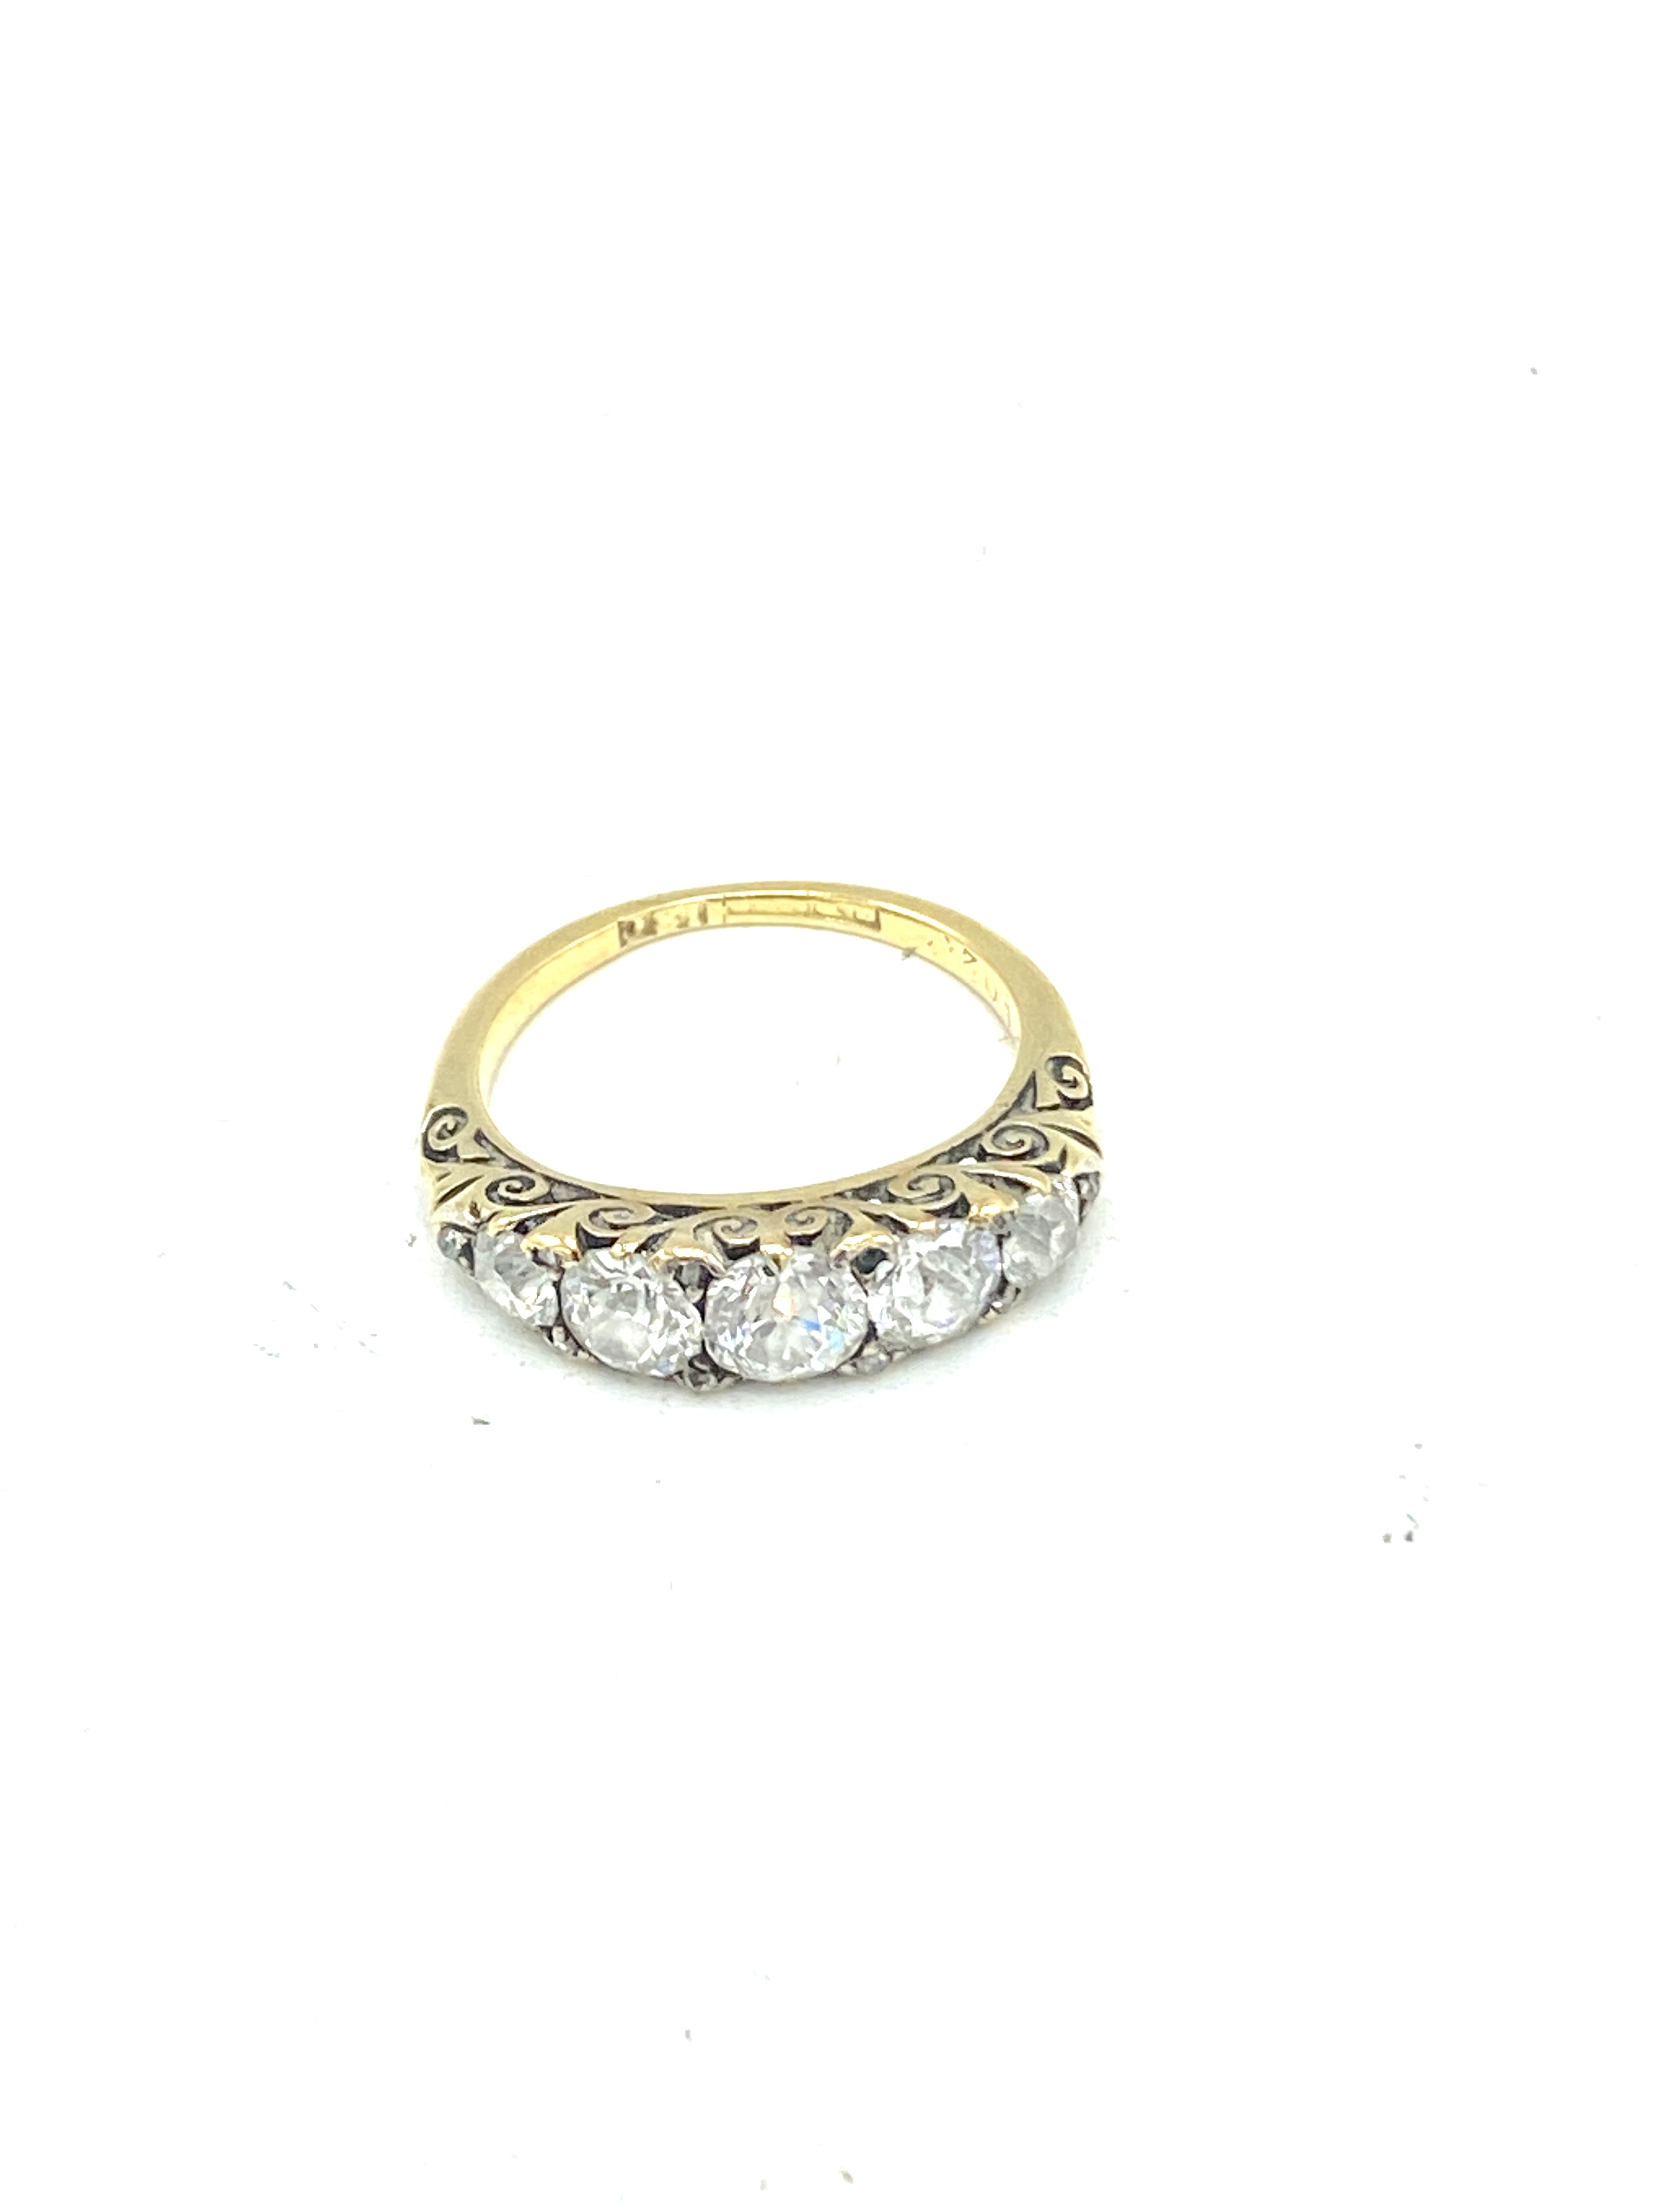 Five stone diamond ring set on an 18ct gold band - Image 4 of 4